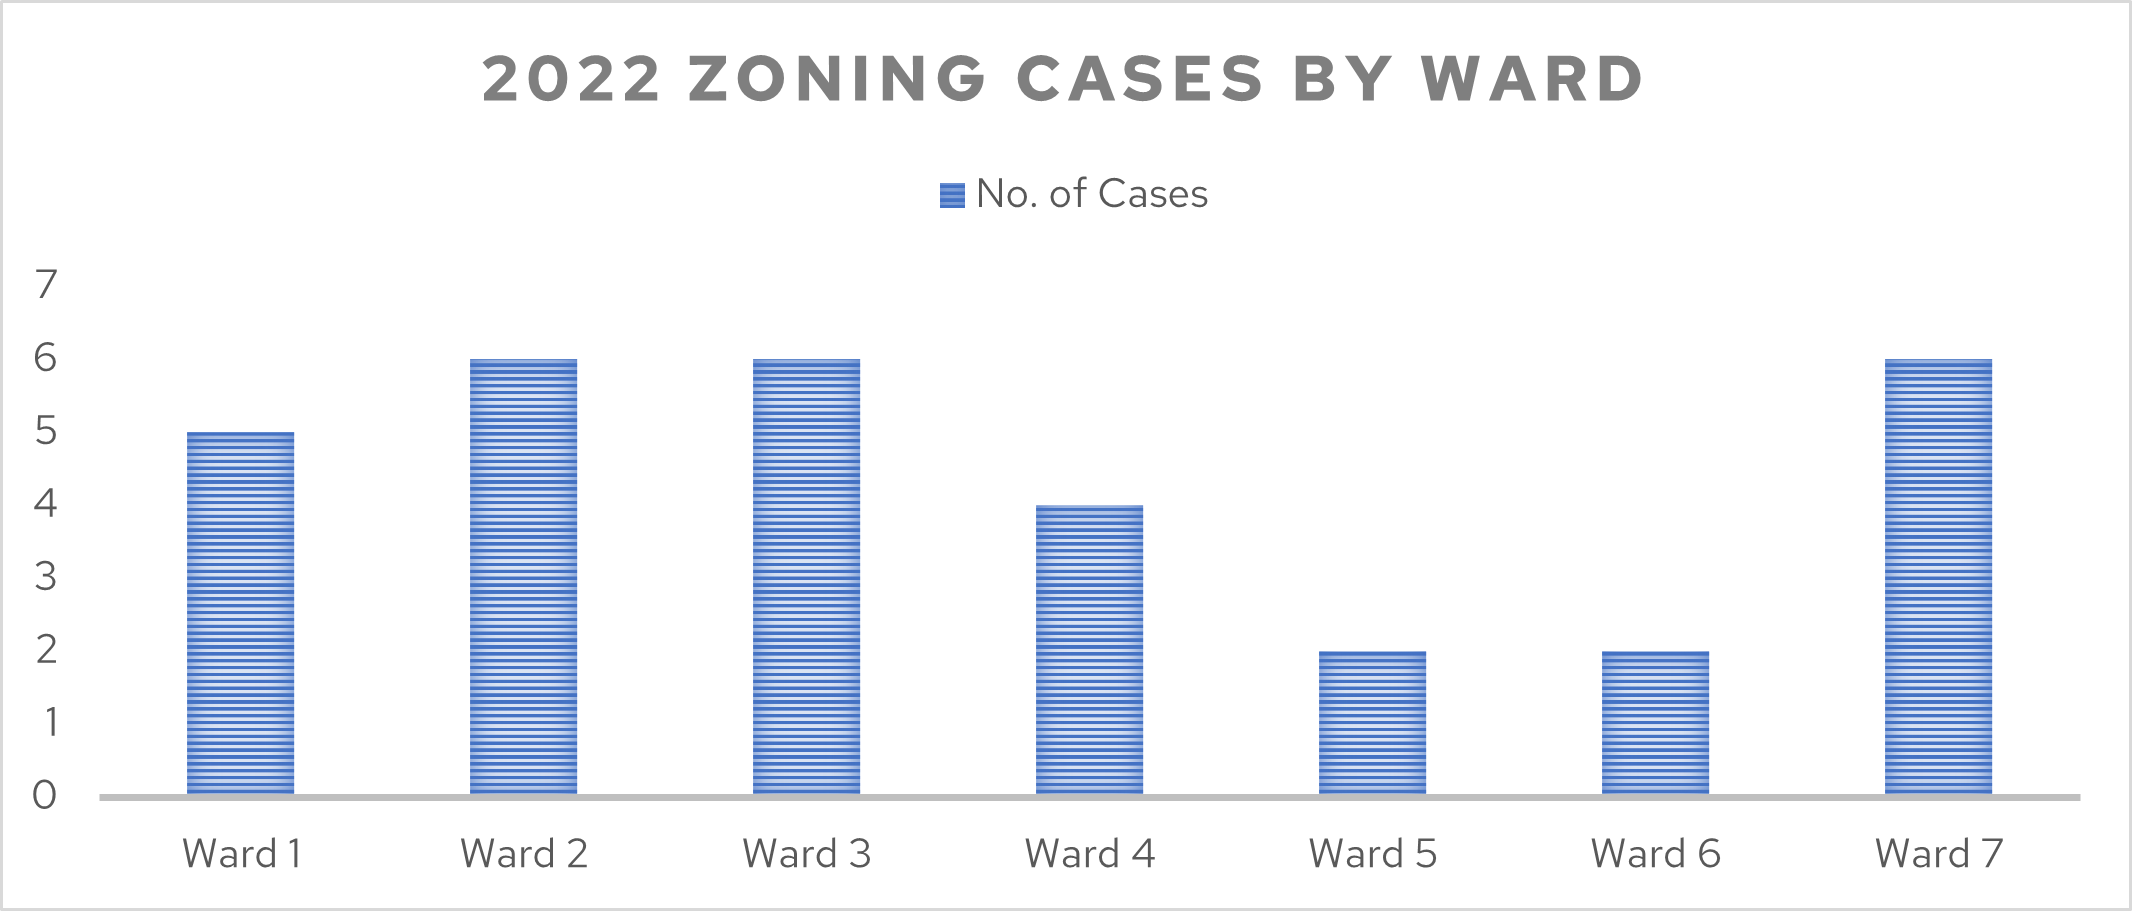 Figure 3: Zoning Cases by Ward, 2022